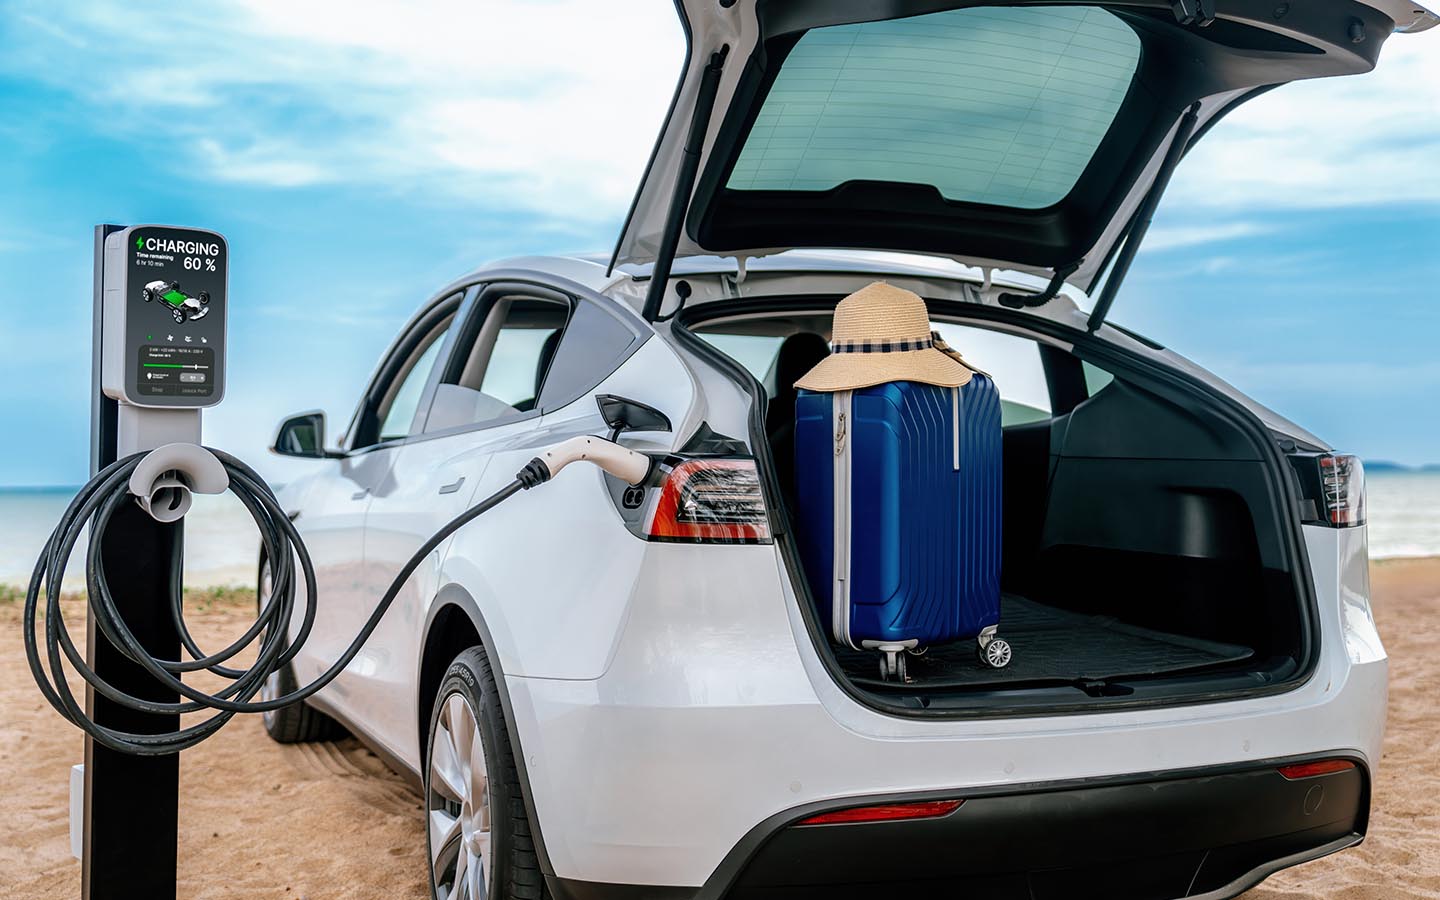 The many Tips to Plan A Long Trip on EV can help enhance the journey